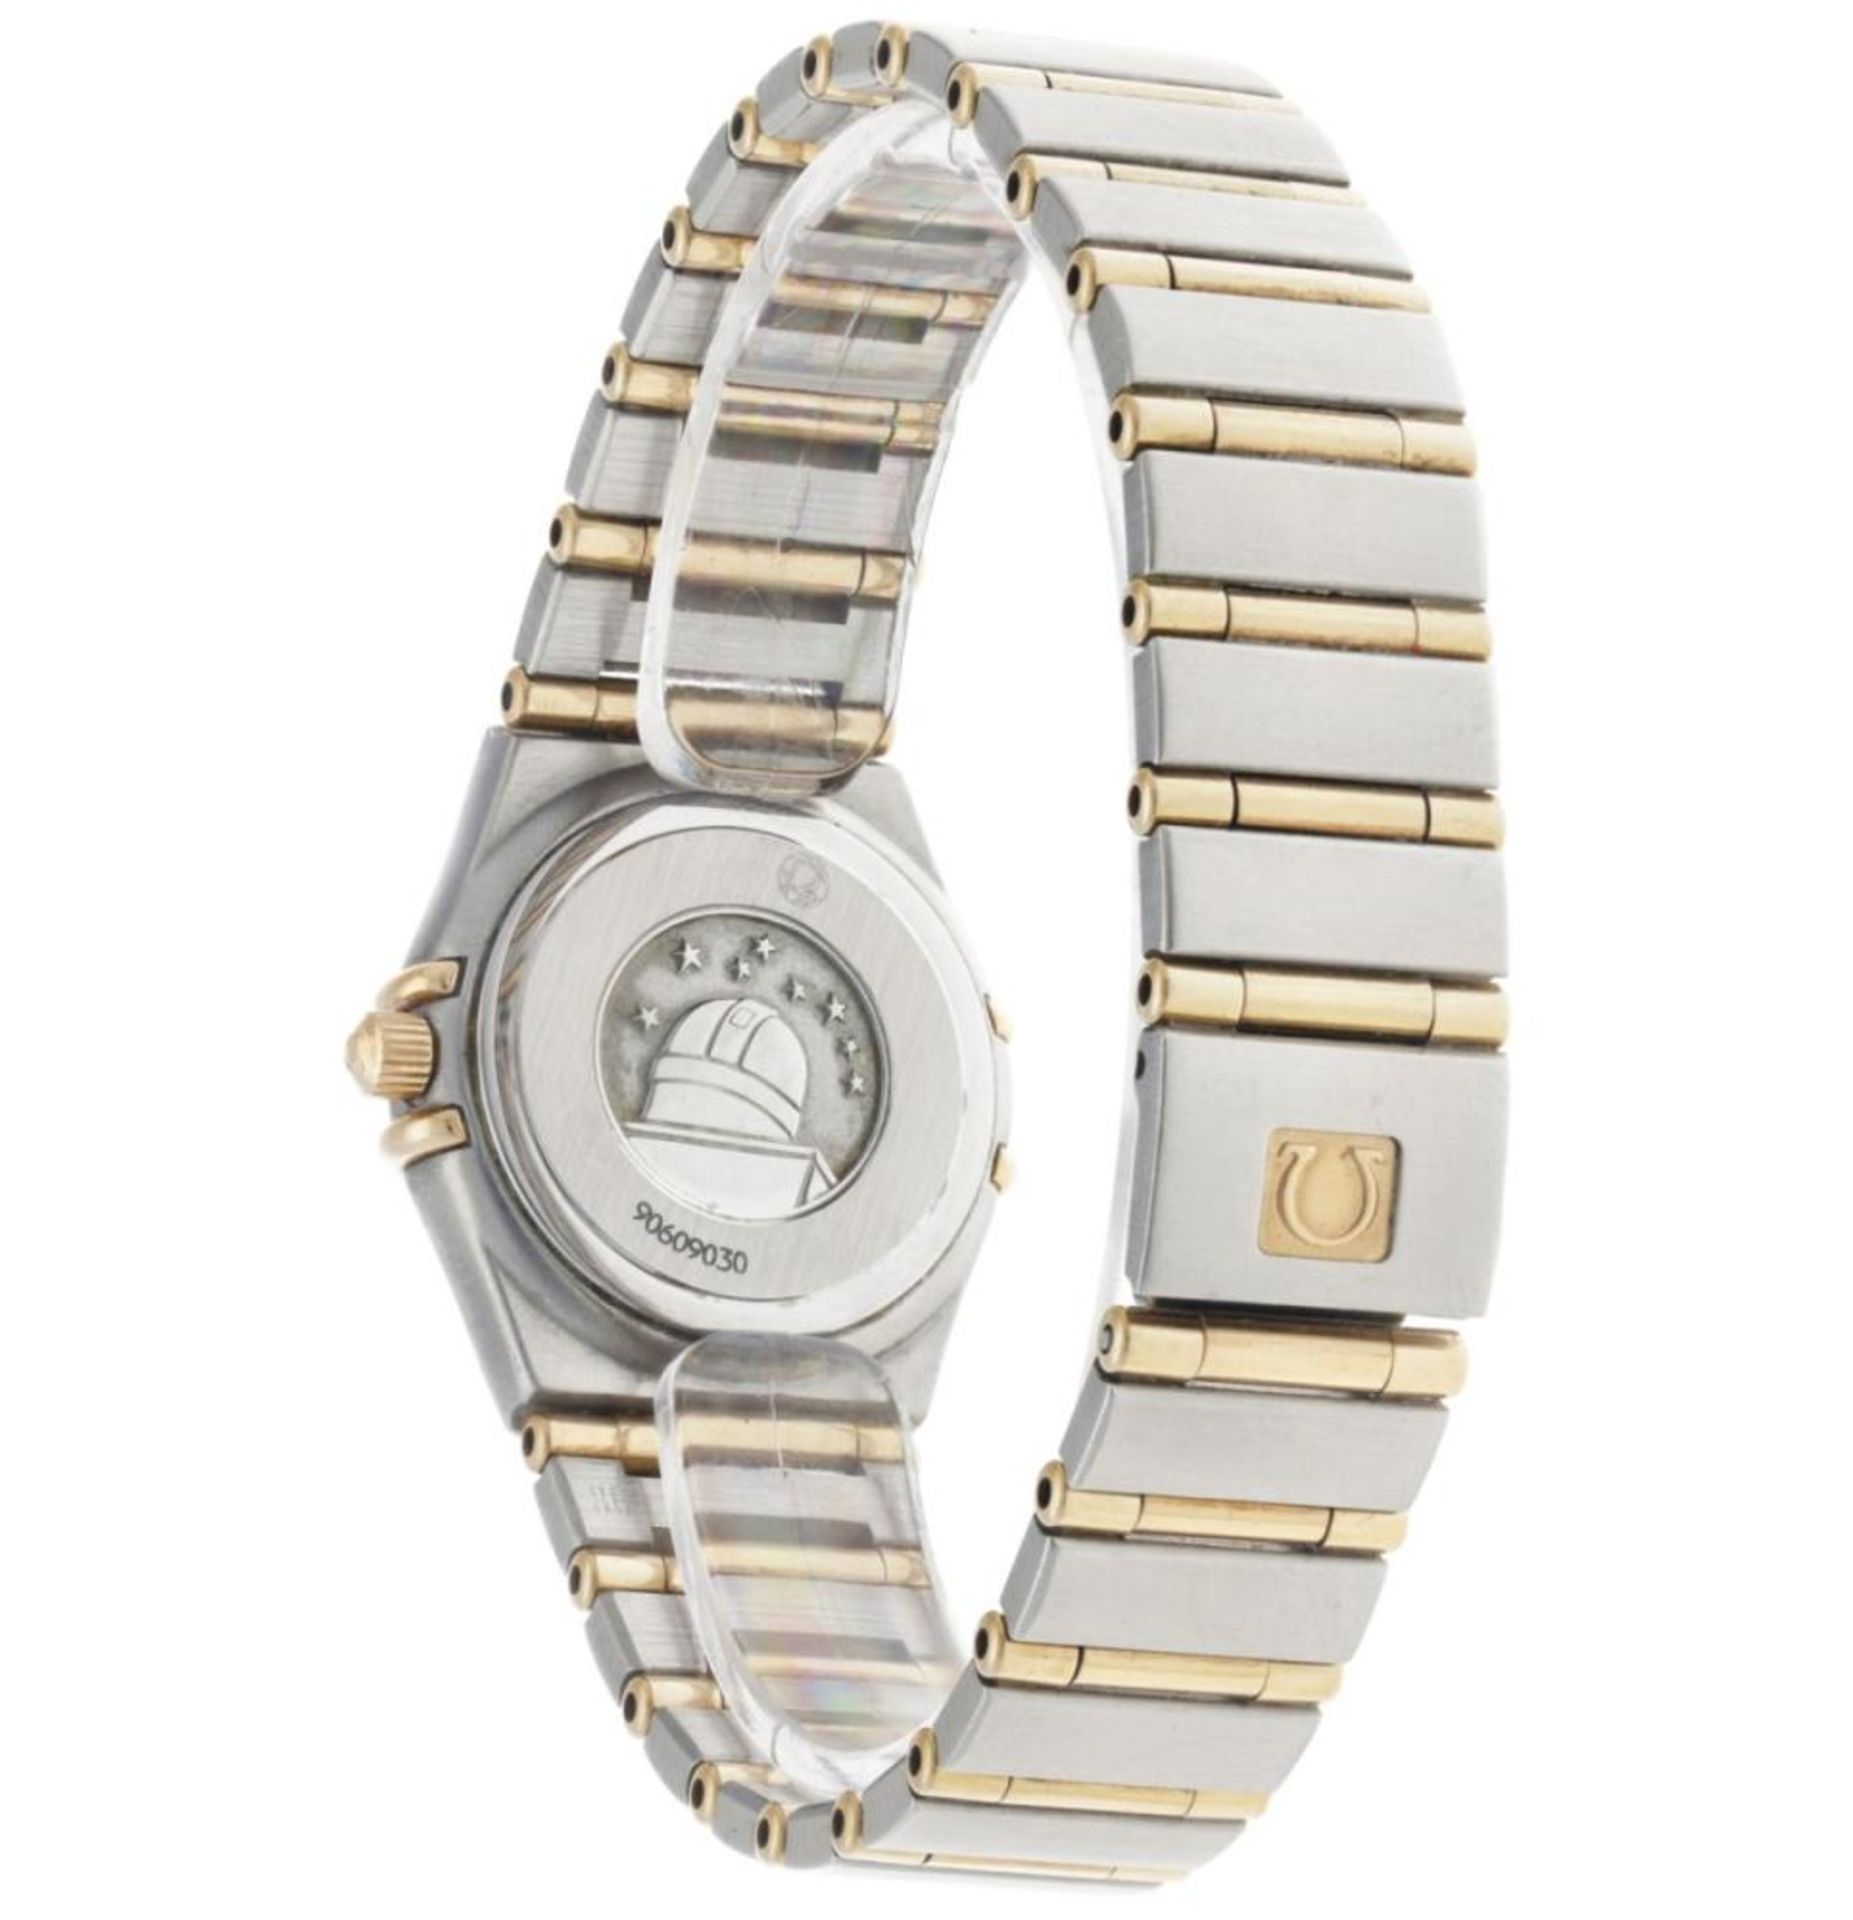 Omega Constellation - Ladies watch - approx. 2010. - Image 3 of 6